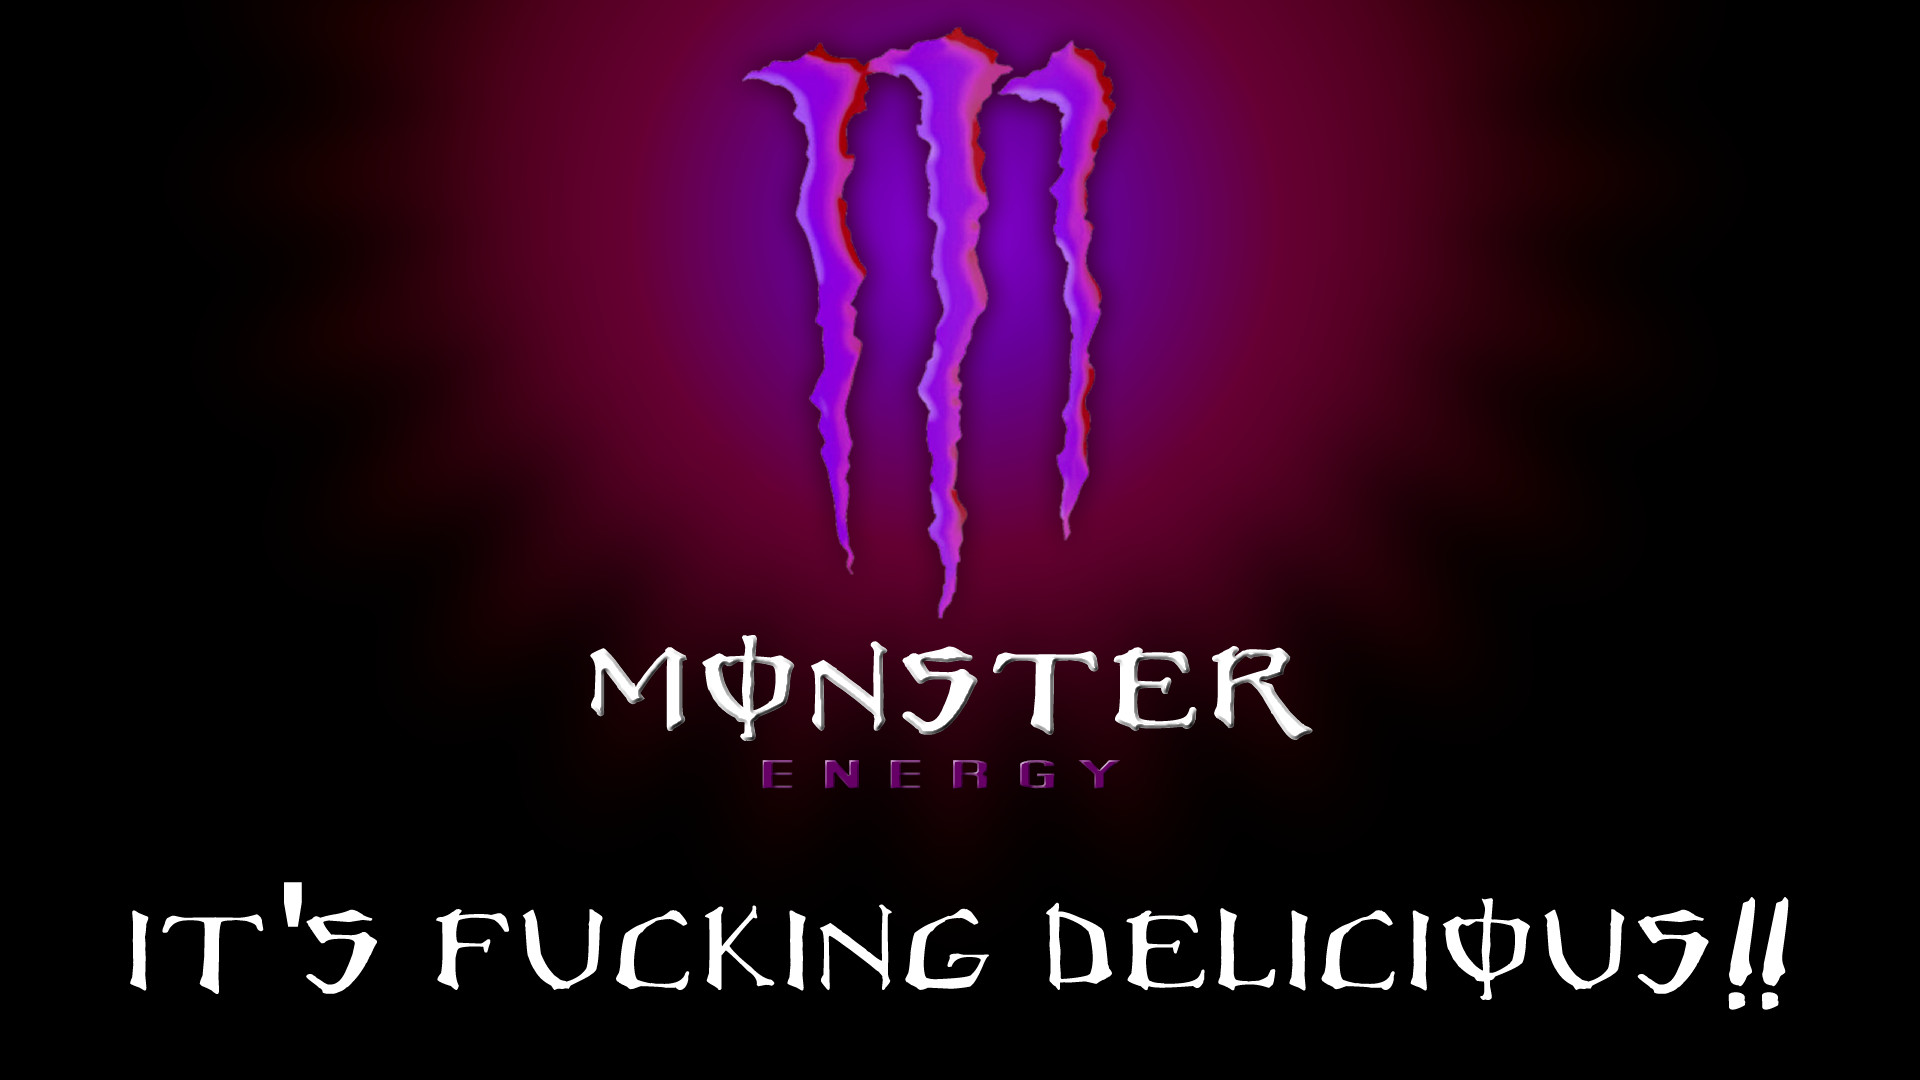 1920x1080 Monster Energy Wallpaper Purple Edition by khain12 Monster Energy Wallpaper  Purple Edition by khain12